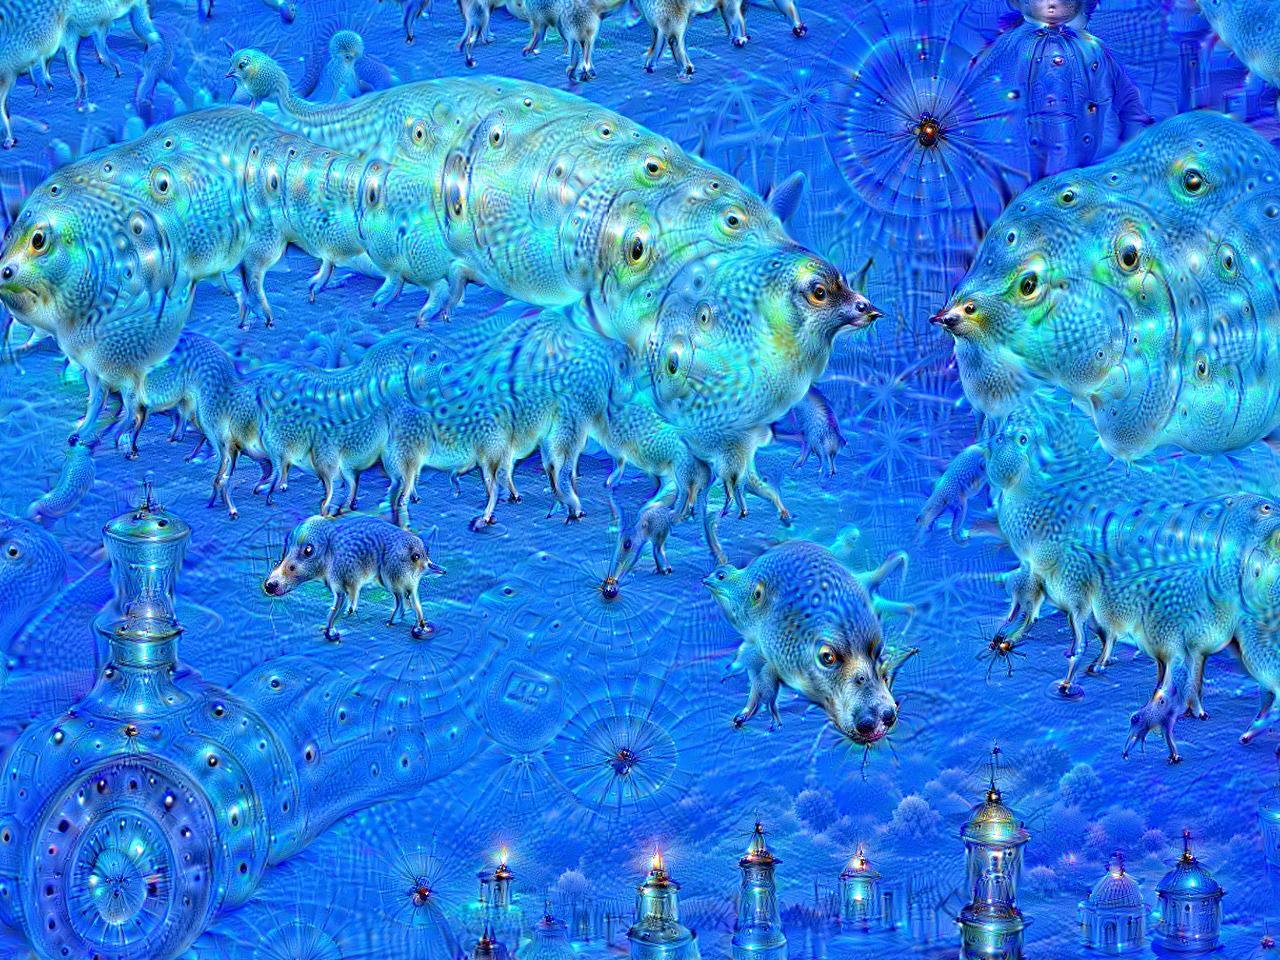 Deep dream image after 10 iterations